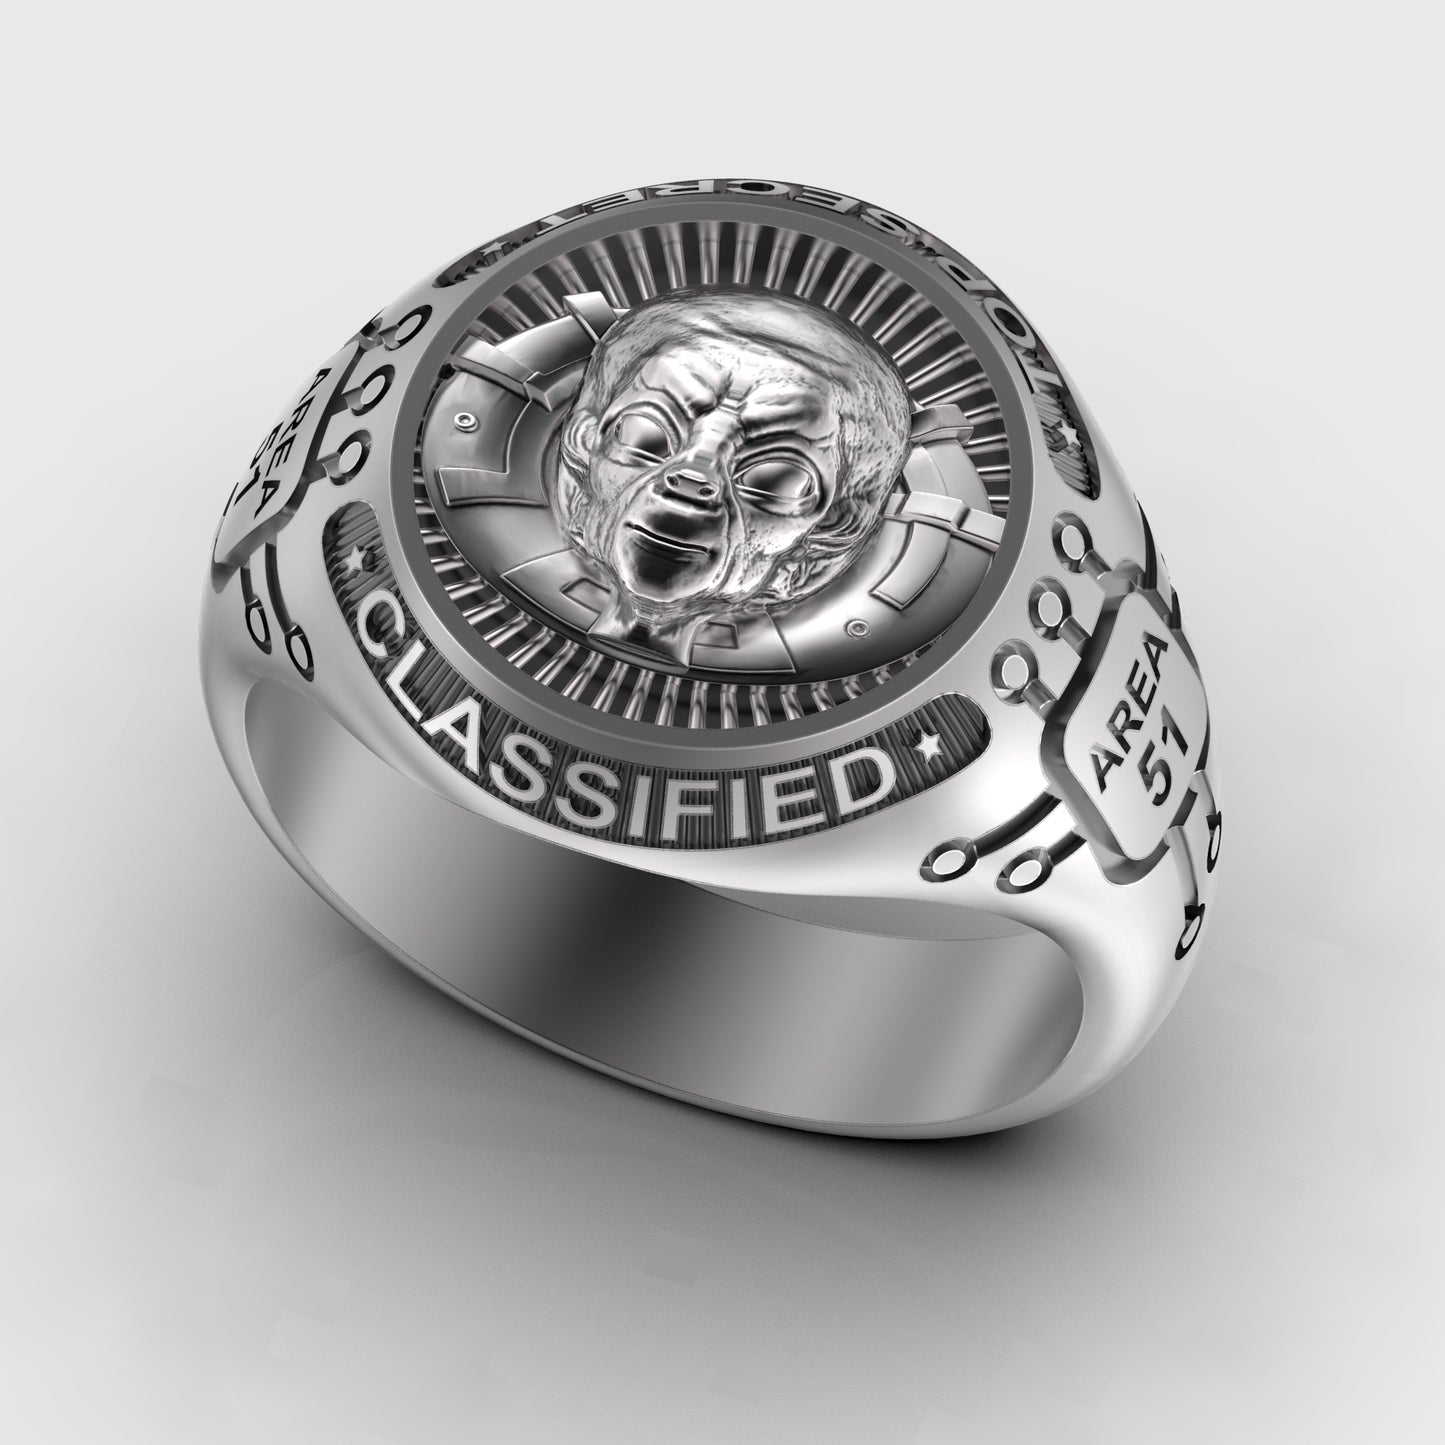 Roswell Incident 75th anniversary gift, UFO Alien Area 51, Mens Signet Ring